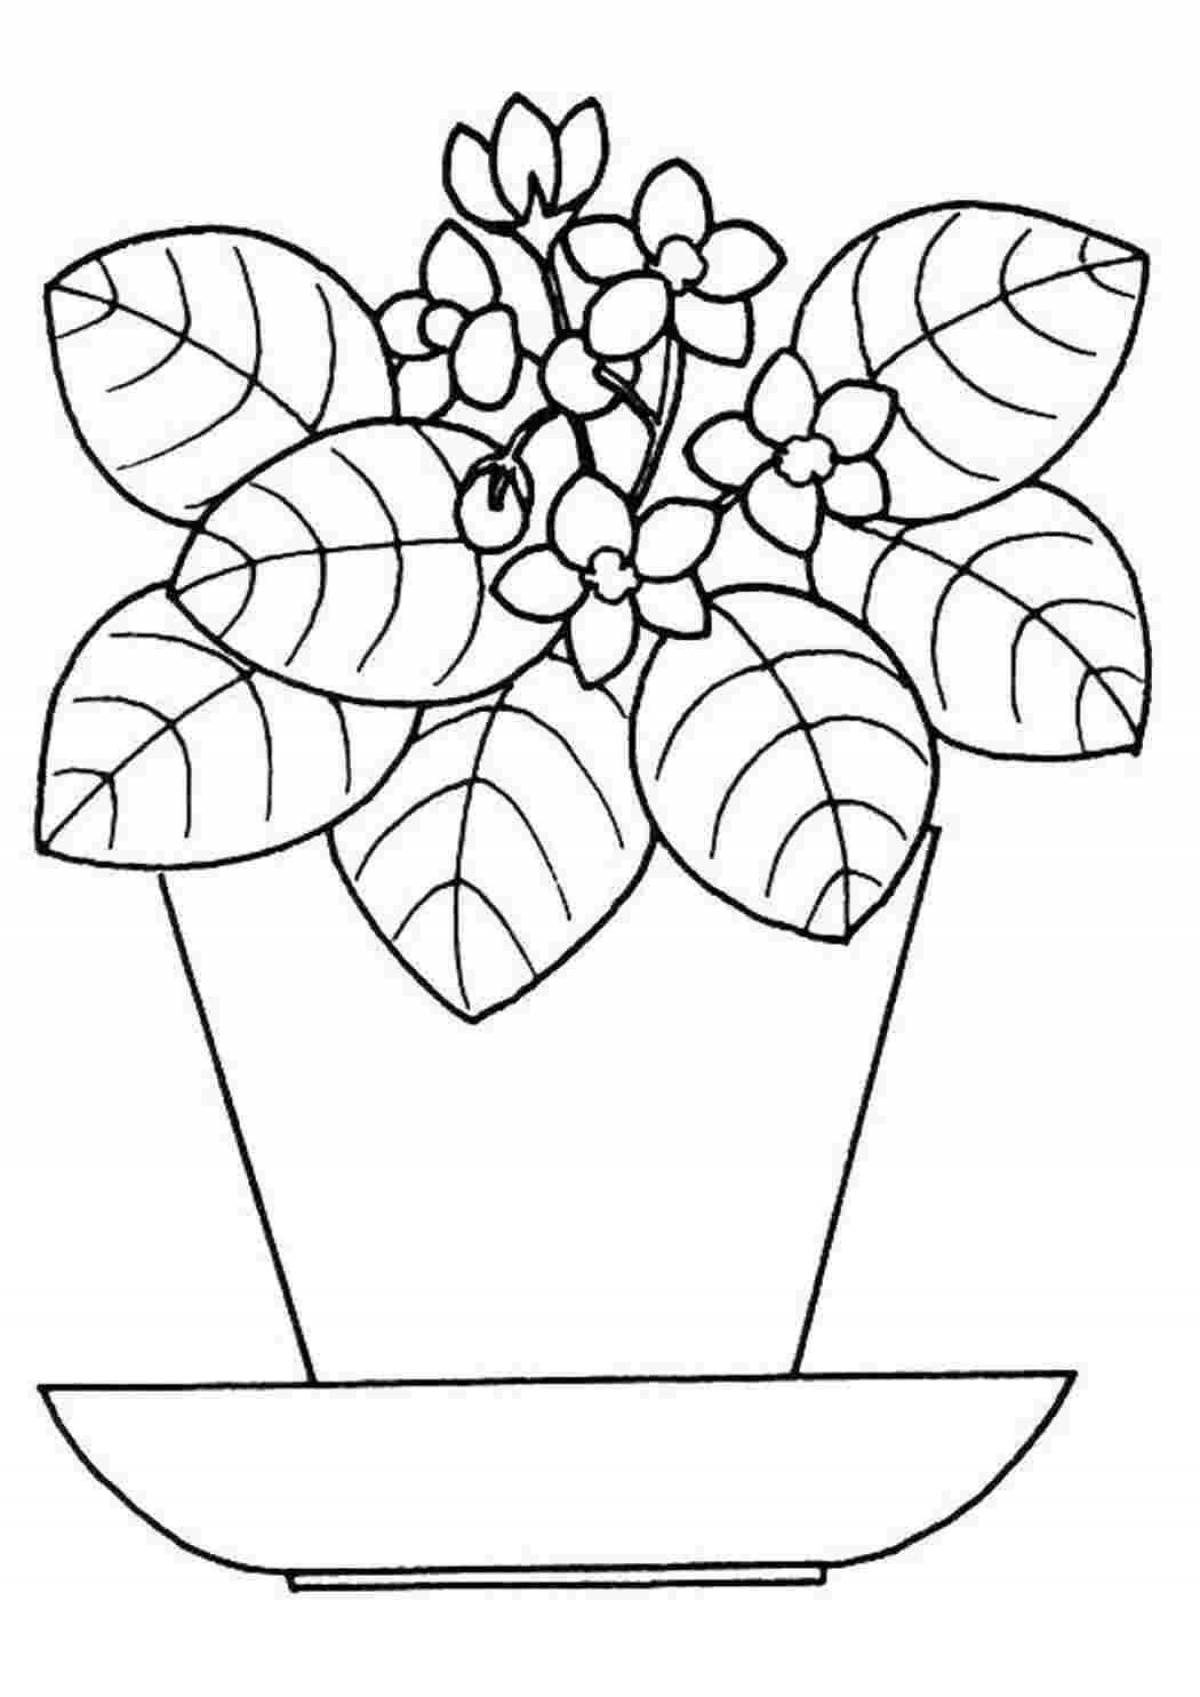 Playful potted flower for 3-4 year olds